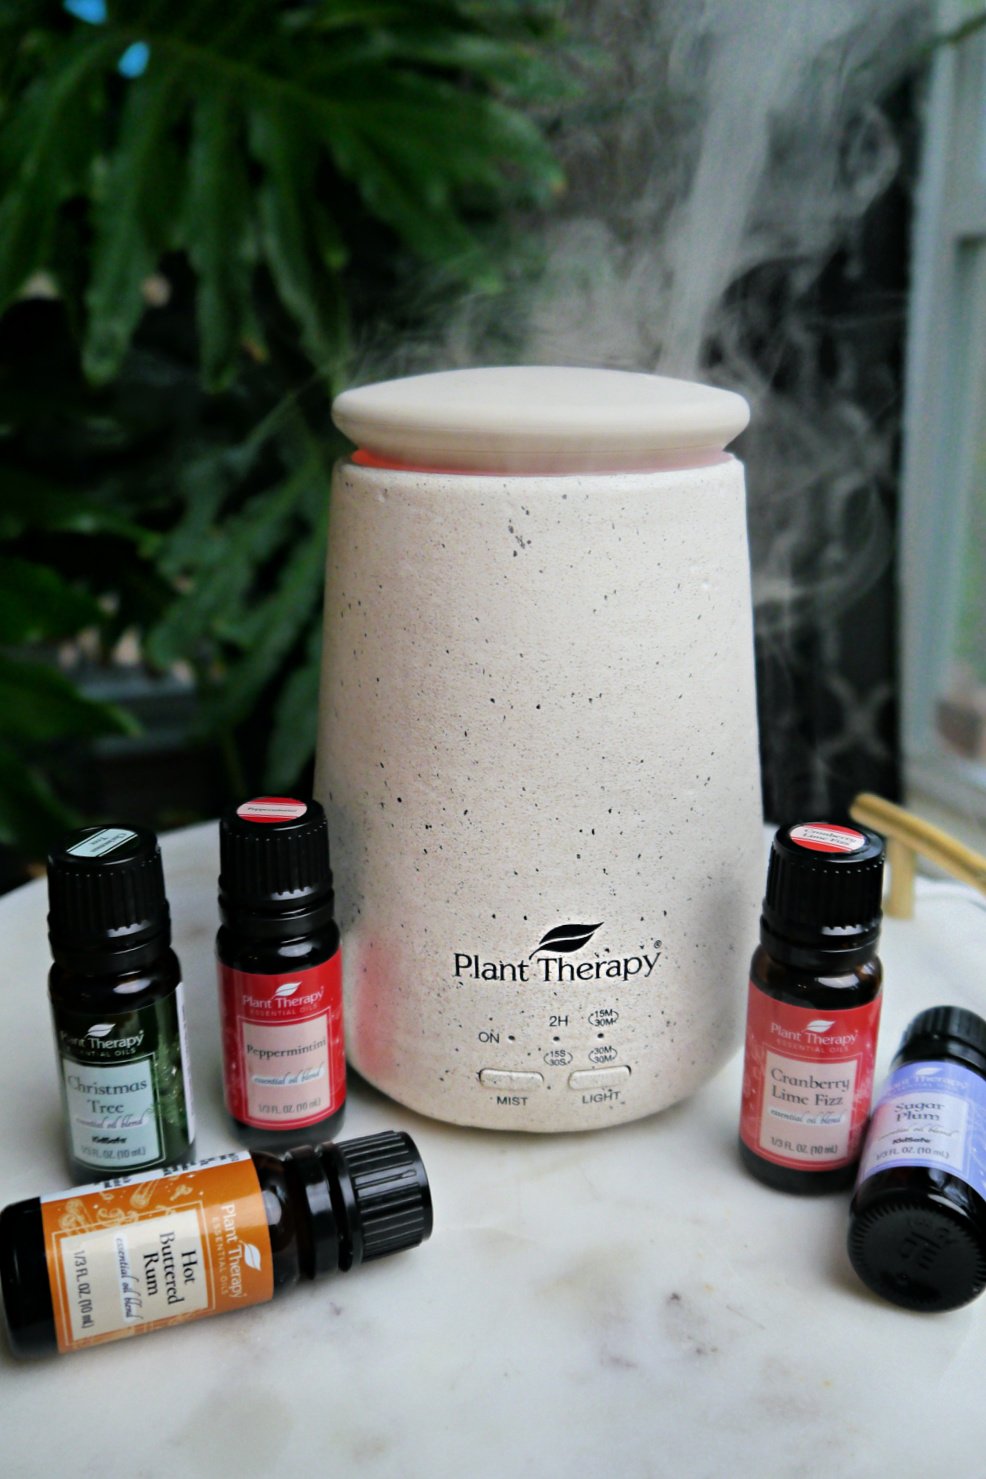 Plant Therapy Diffuser with diffuser blends around it.